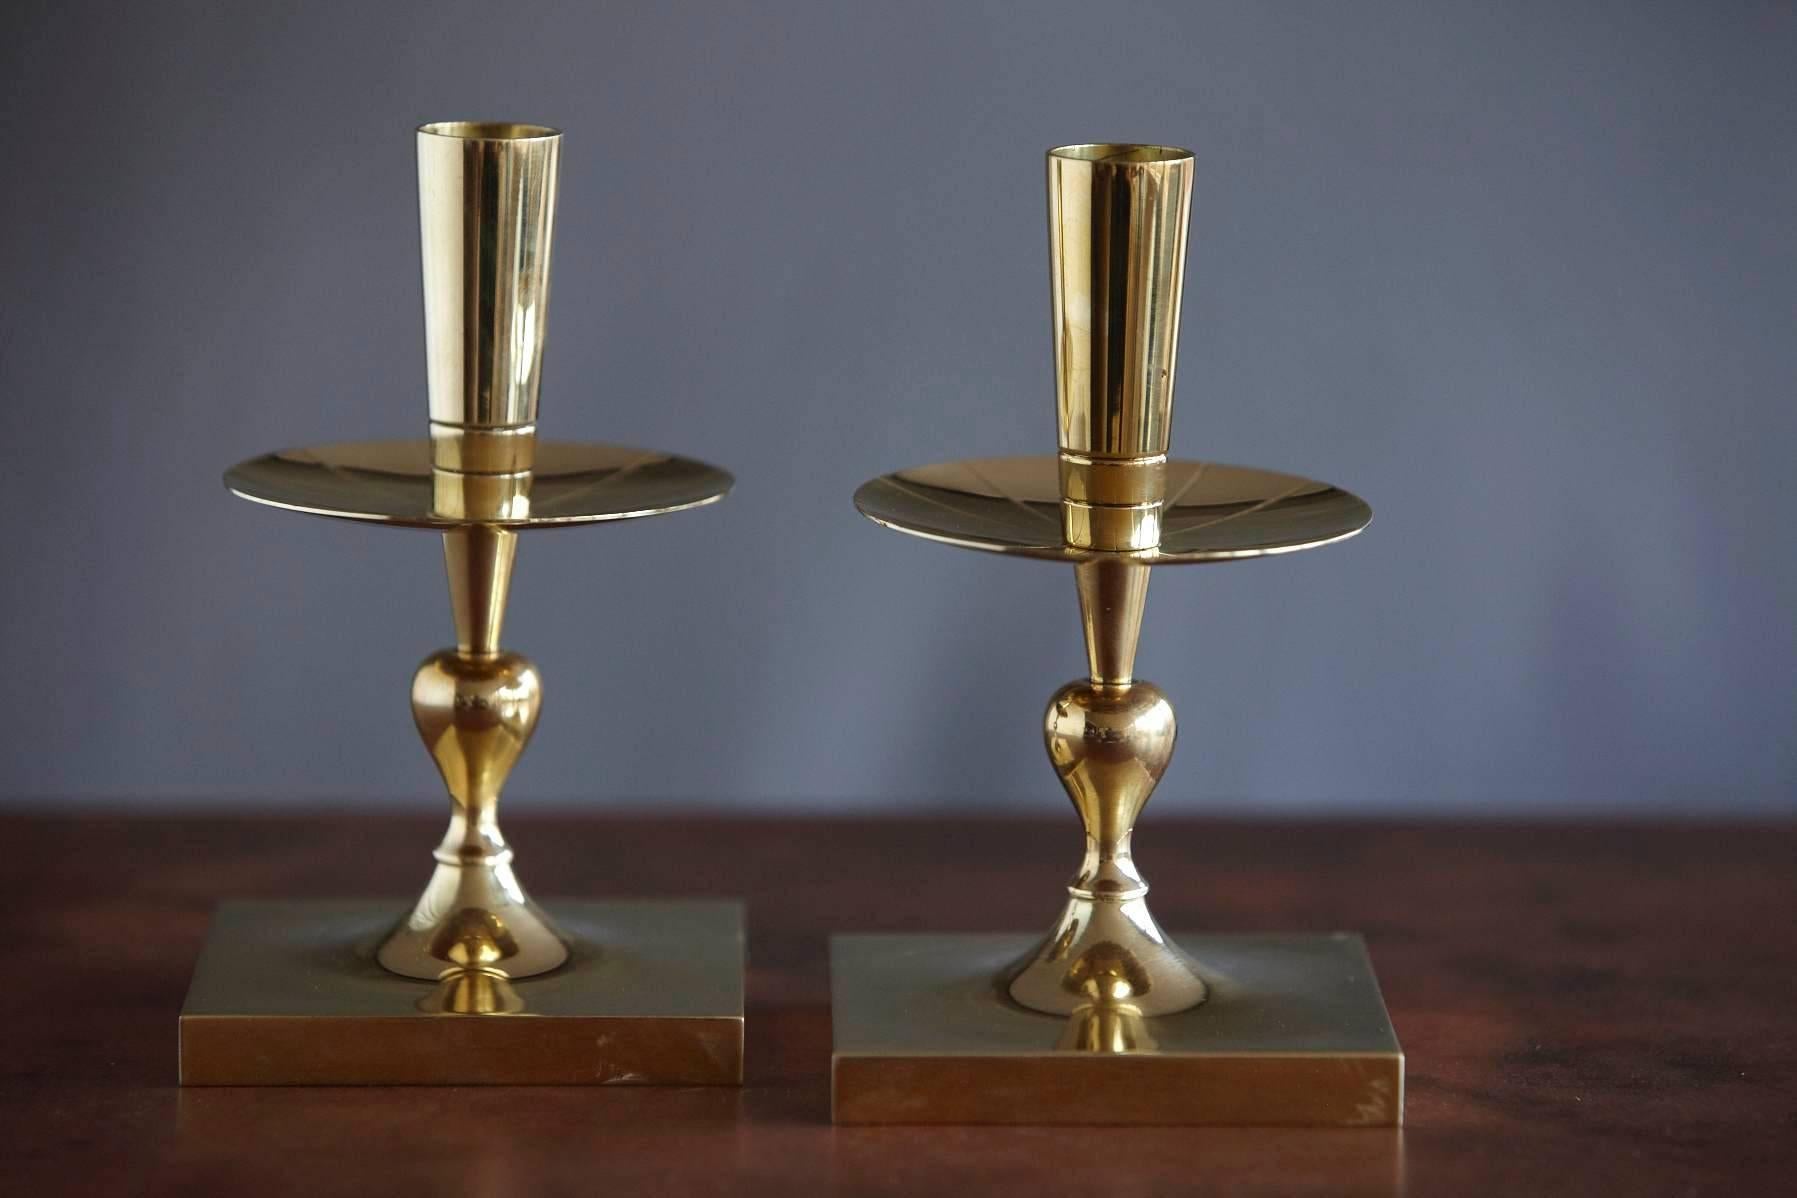 Elegant pair of Tommi Parzinger solid brass candleholders made by Dorlyn Silversmiths New York, manufacturers hallmark engraved on the bottom.